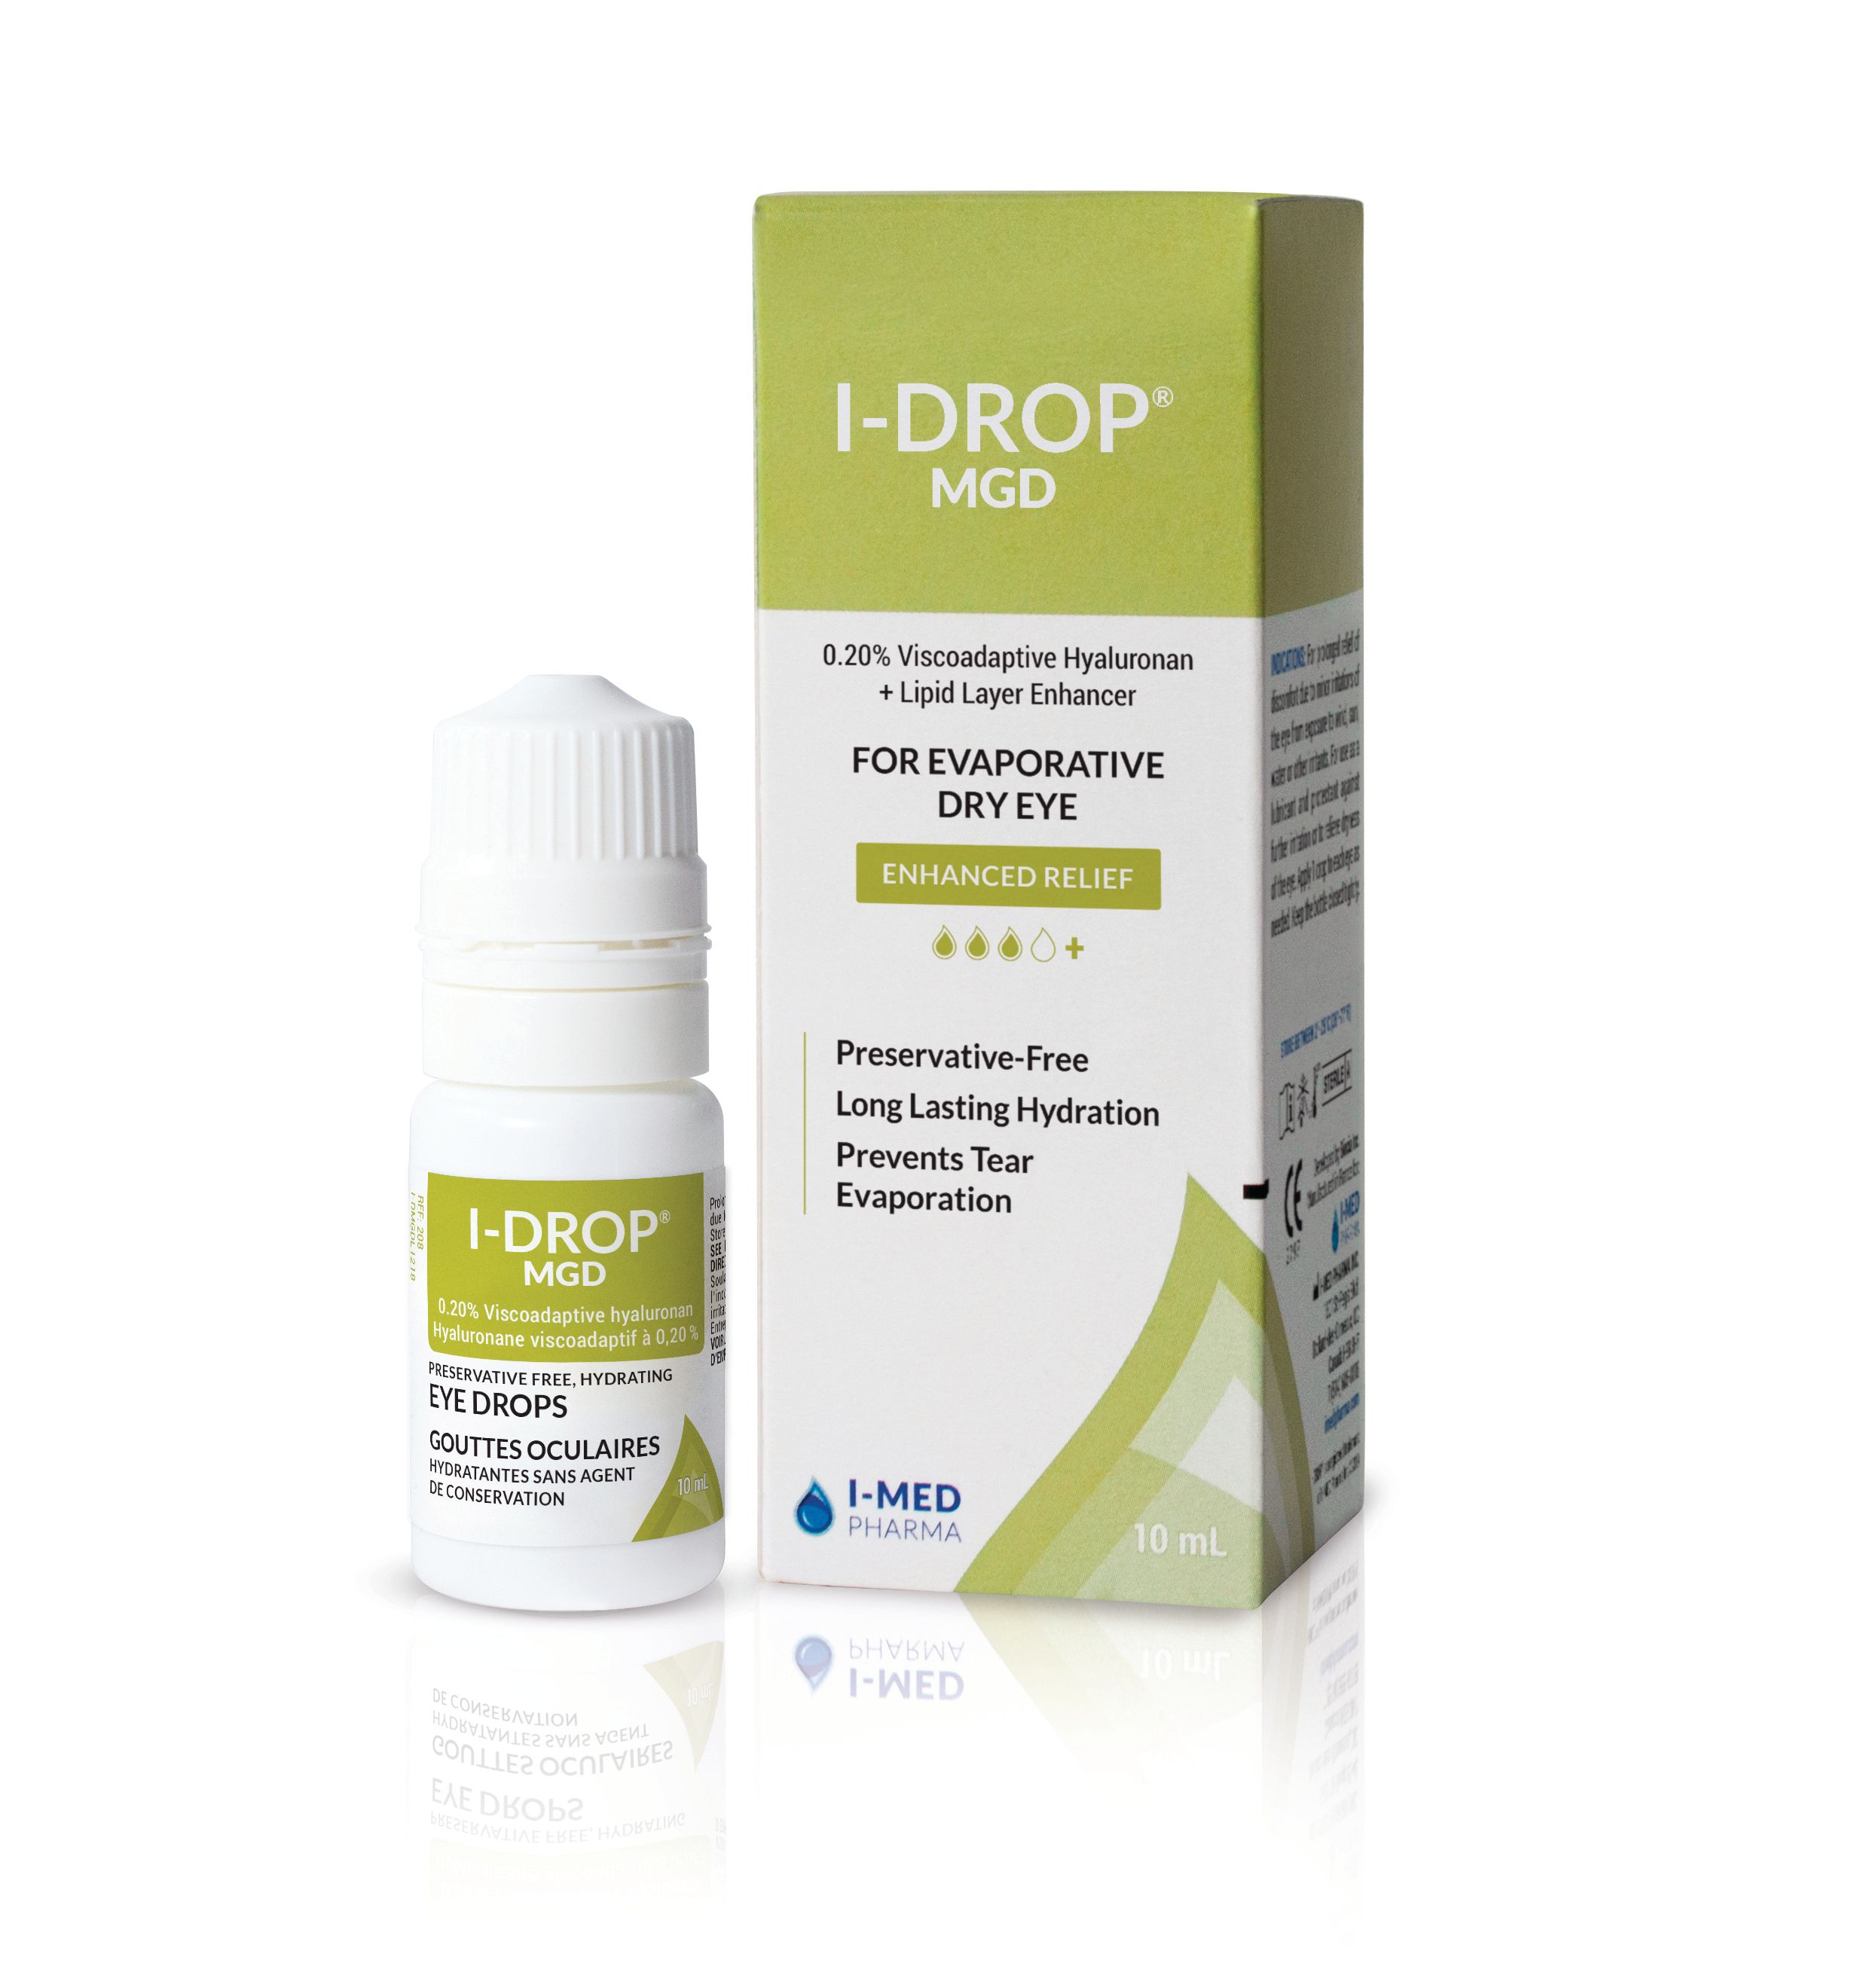 Free full size I-DROP MGD when you book a meeting with Grafton Optical on stand M325